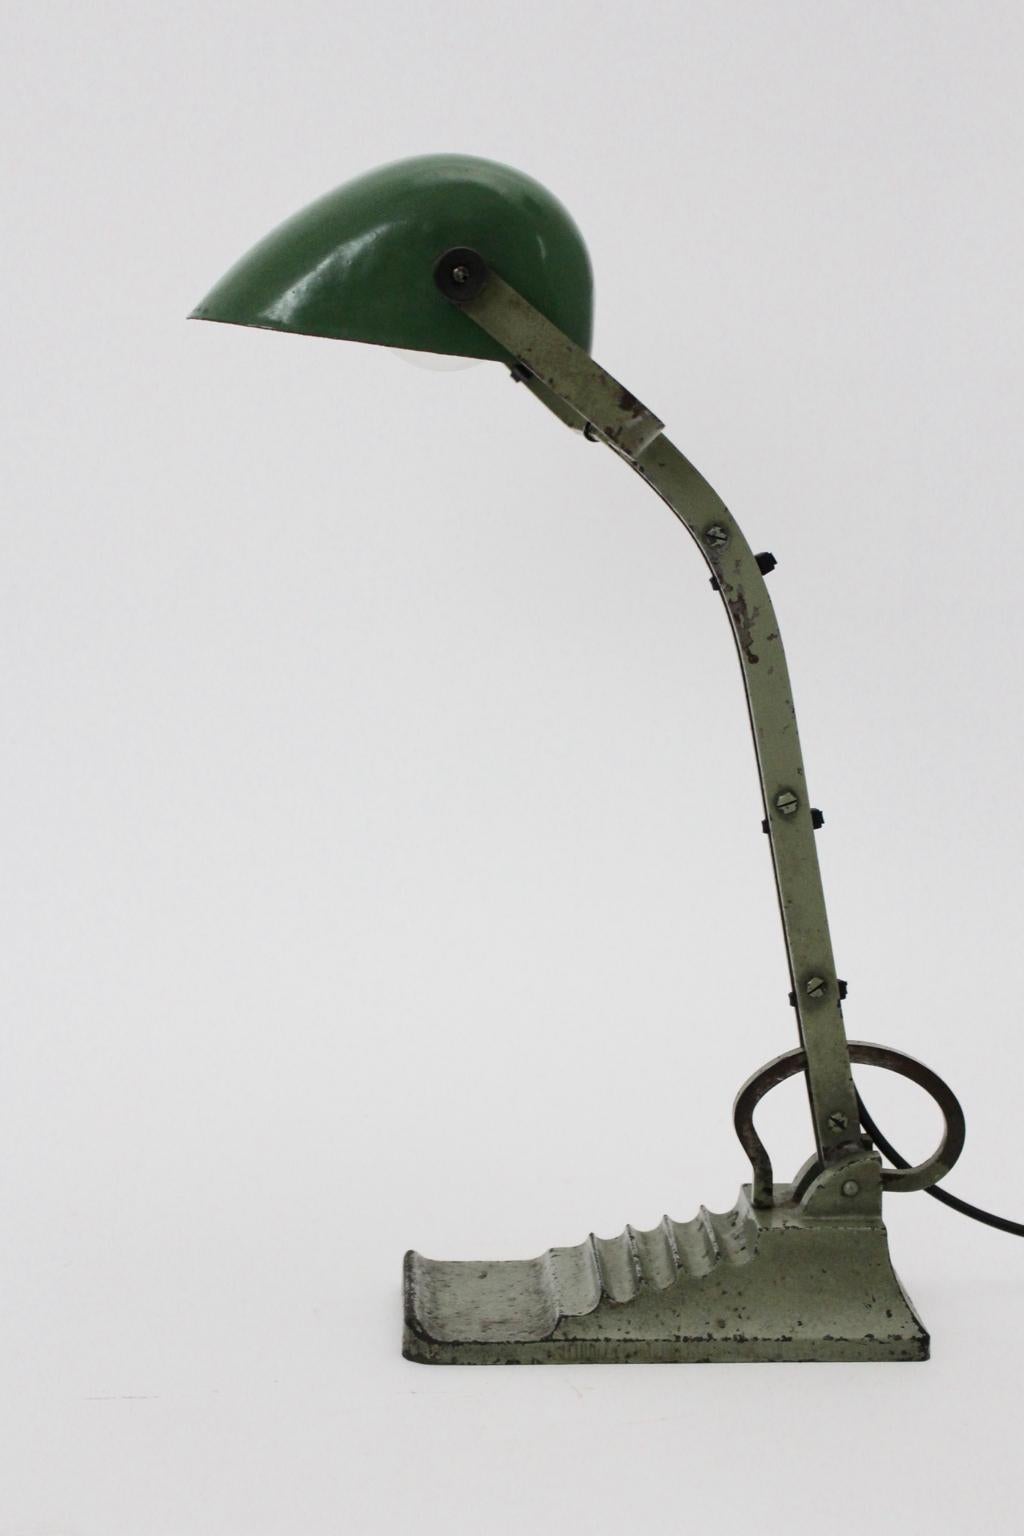 Bauhaus Art Deco table lamp or architects desk lamp from green metal adjustable from up to down, 1920s.
The green lacquered metal base shows a great patina.
The metal lamp shade is green and white enameled.
One E 27 socket
approx. measures:
Width 26